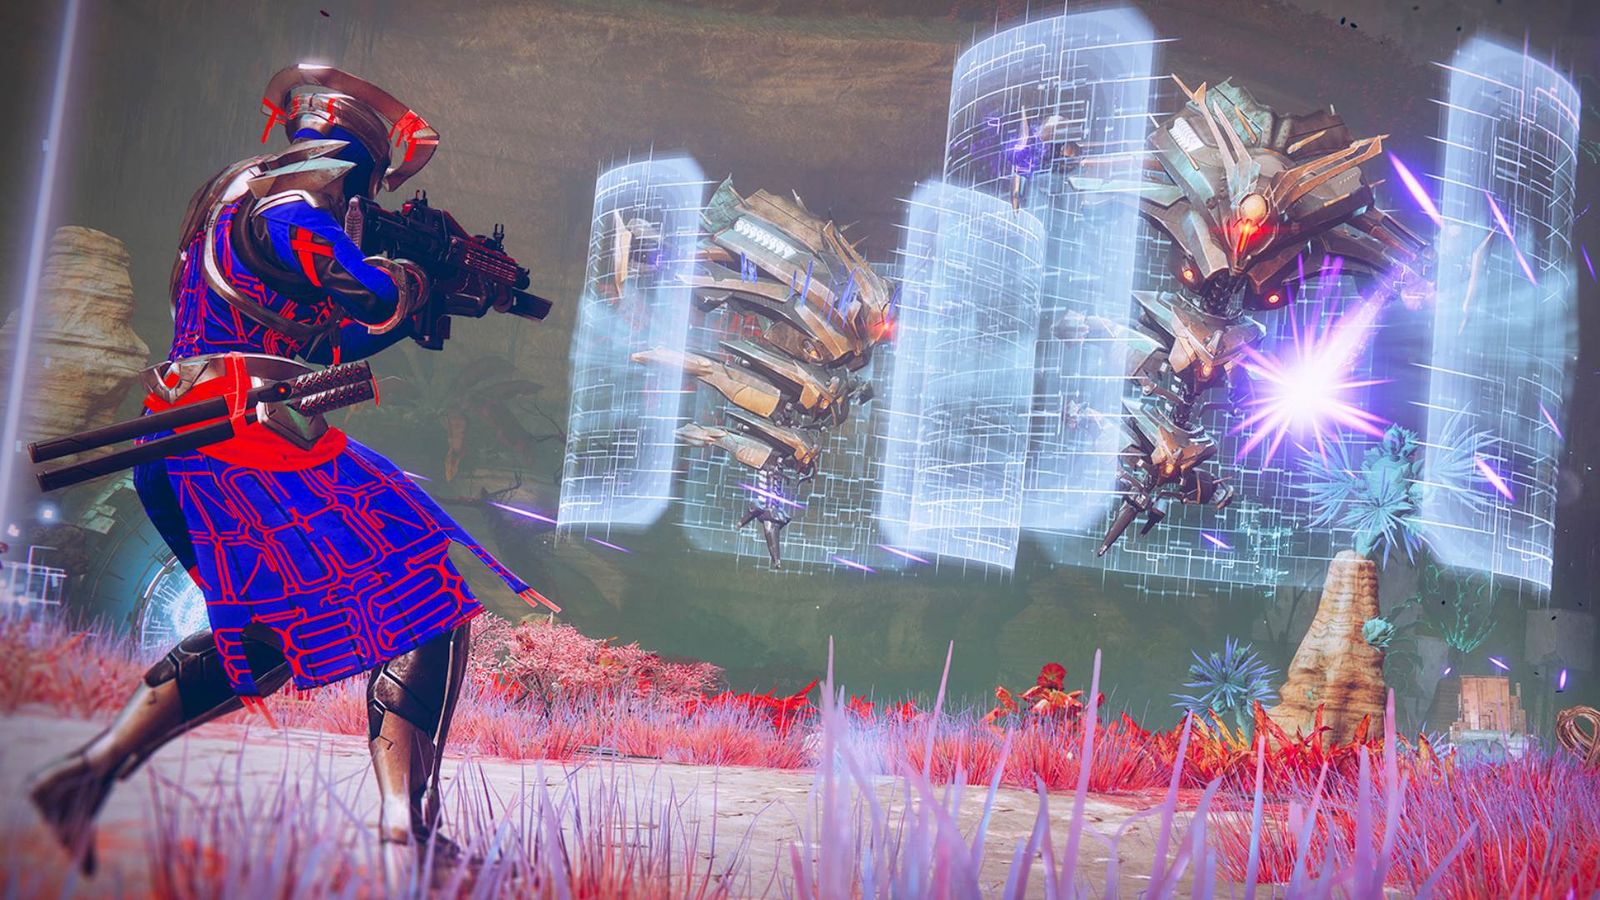 A Titan wearing the Episode Echoes armor fighting two Vex on Nessus in Destiny 2.